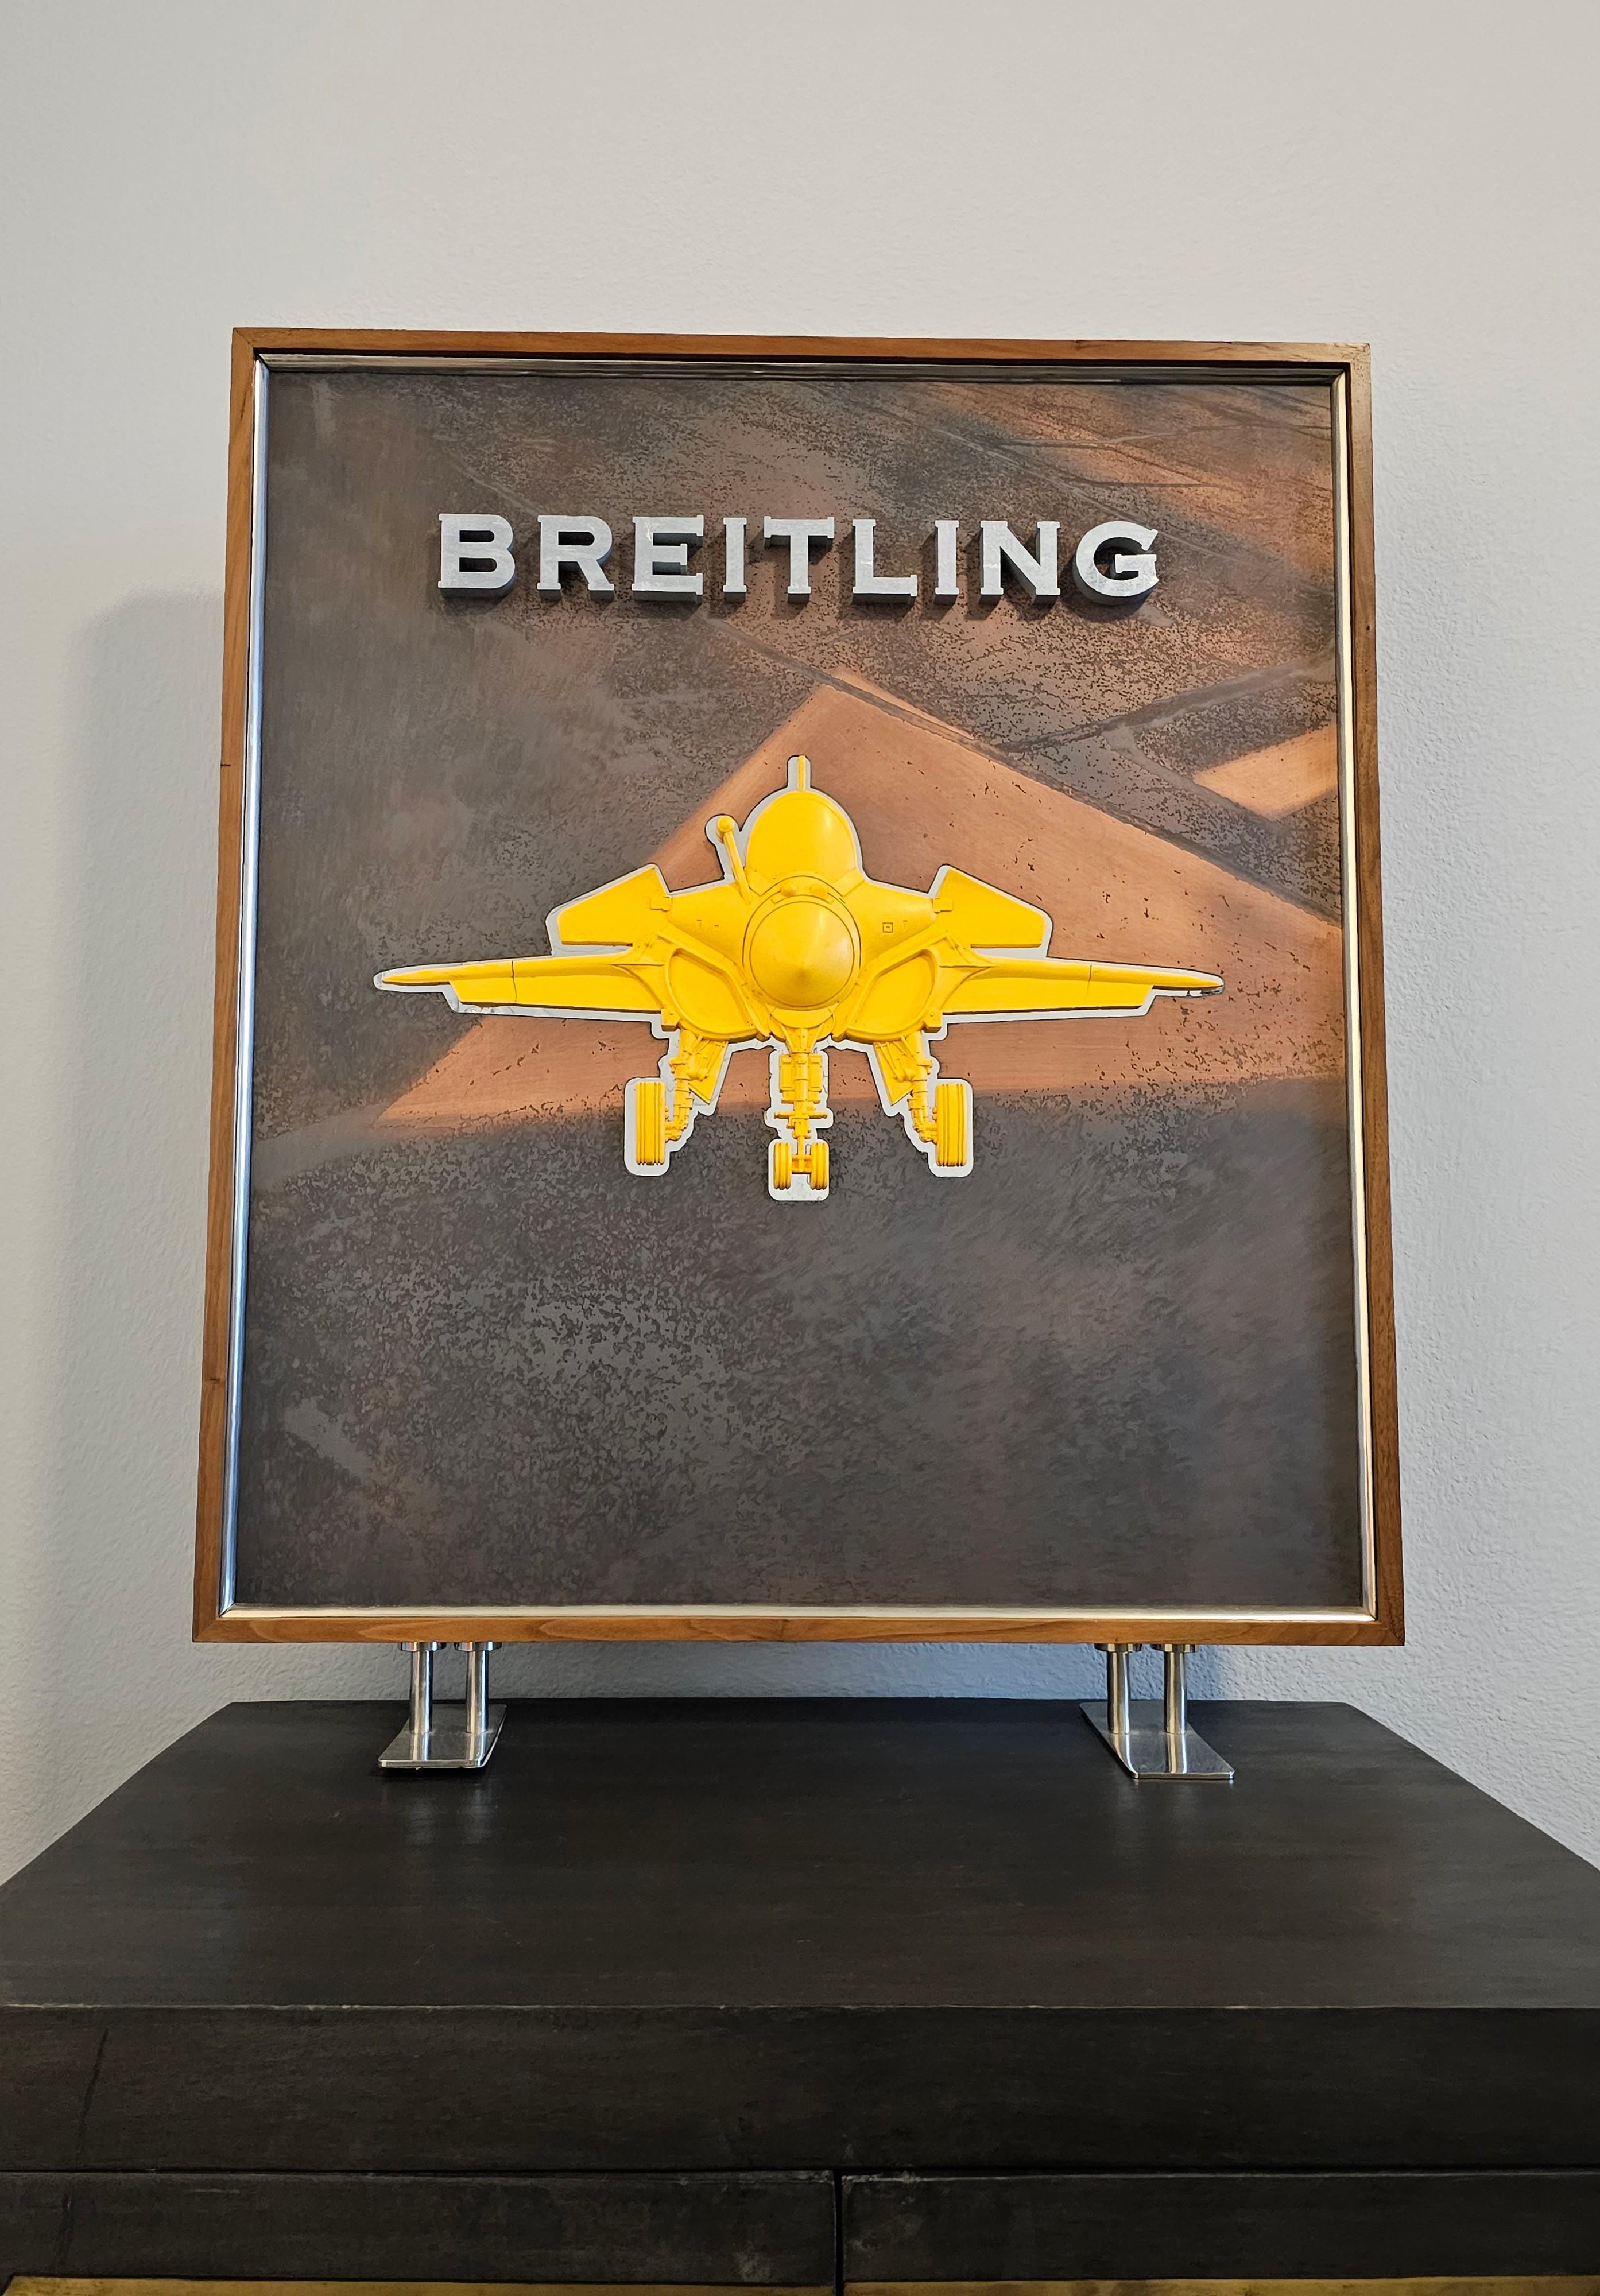 A scarce vintage Breitling watch three-dimensional retail store advertising display stand window sign. 

Rare large free-standing example, only given to select dealers, featuring a tall rectangular solid wood frame, raised chrome Breitling letters,